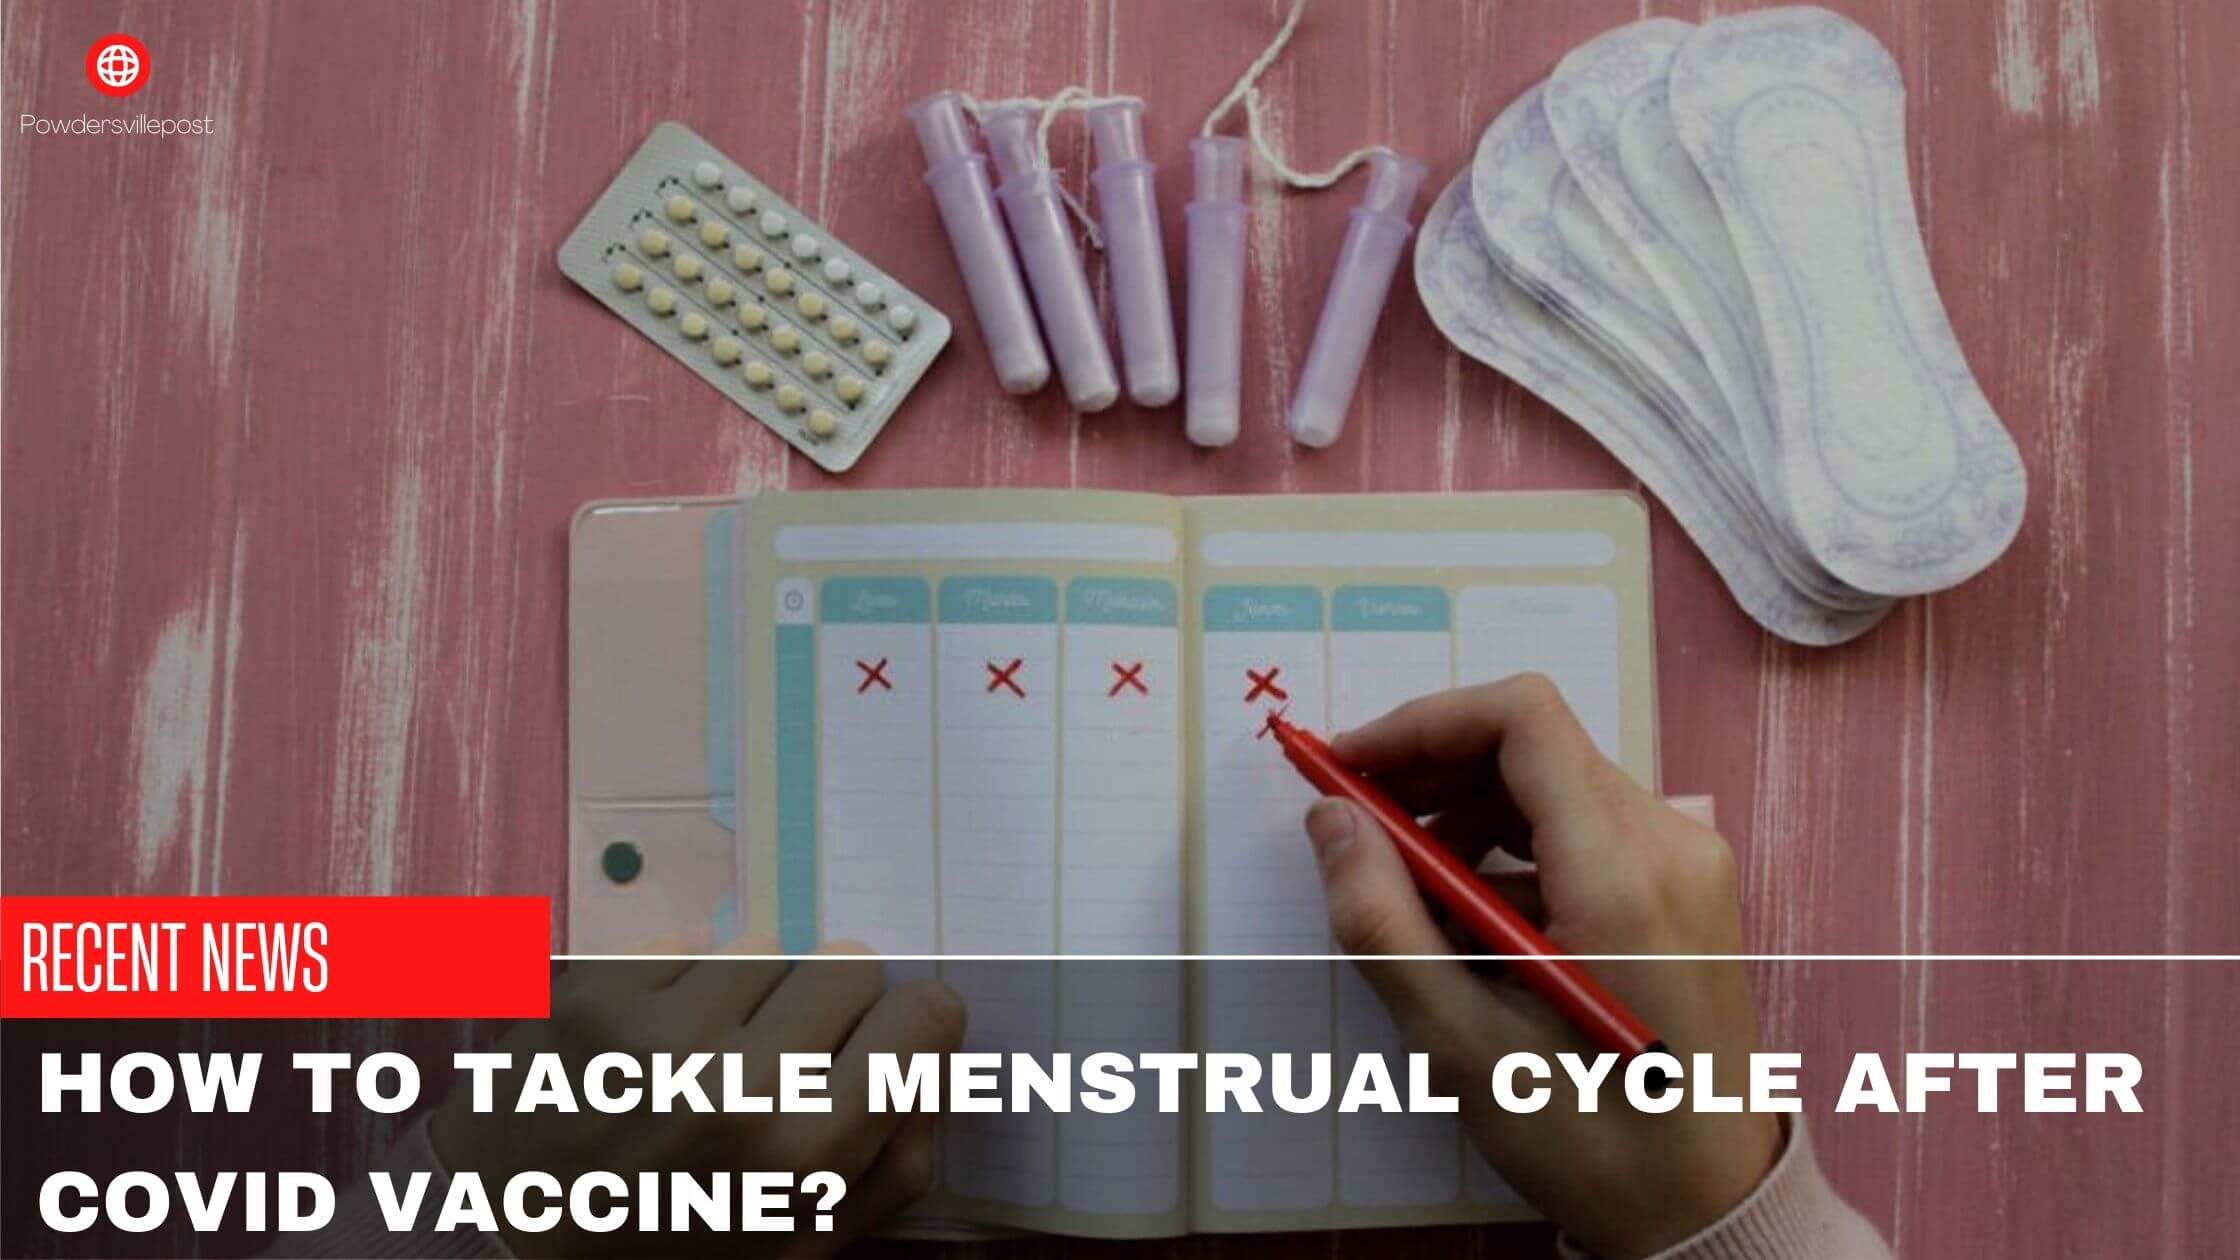 How To Tackle Menstrual Cycle After Covid Vaccine